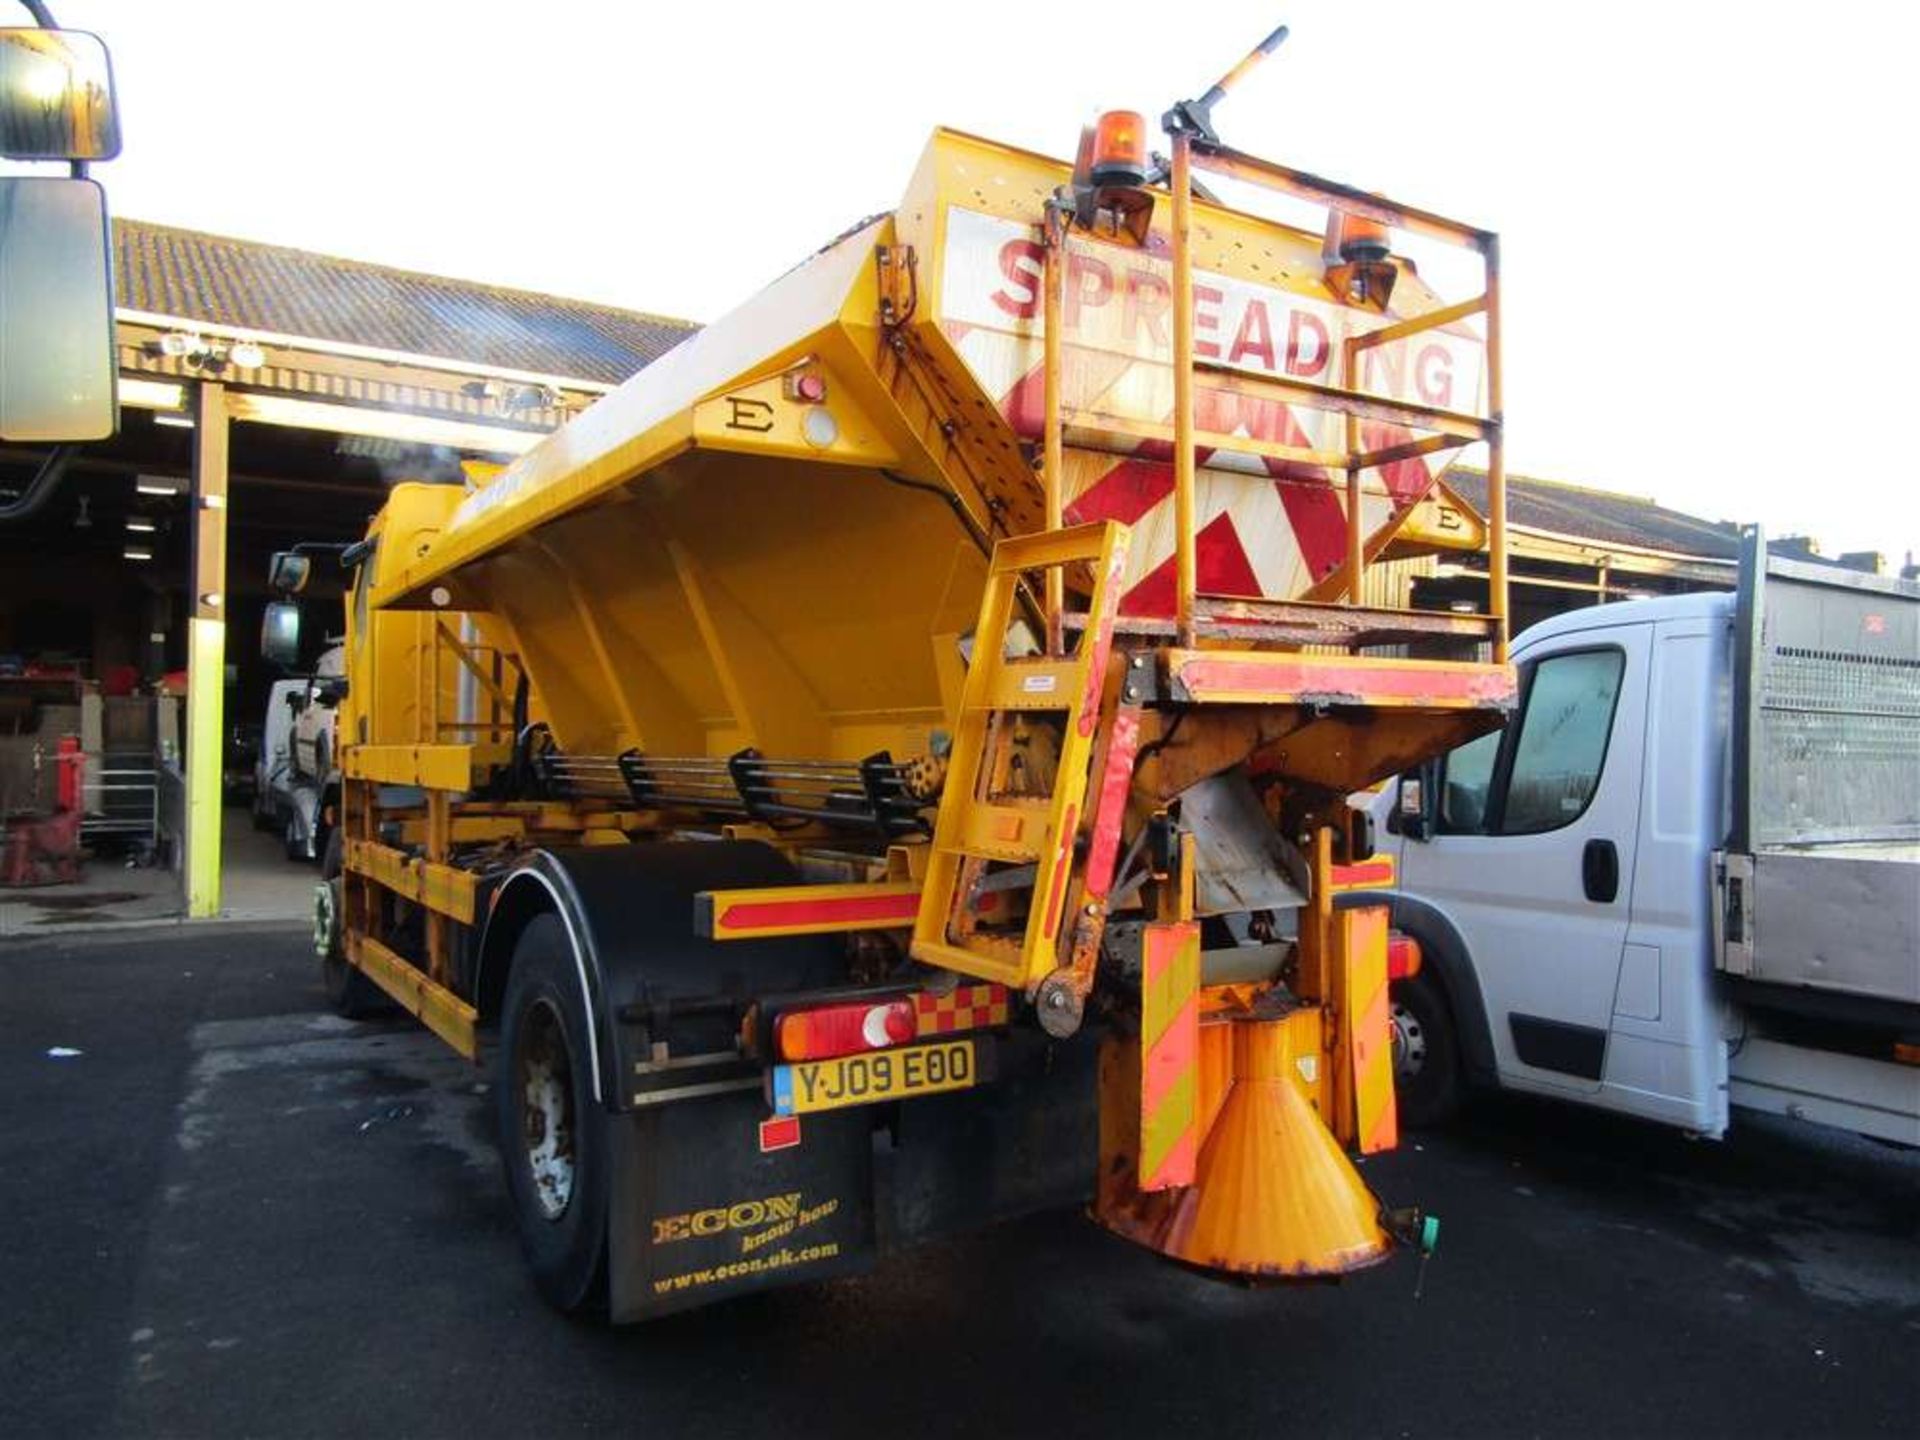 2009 09 reg Leyland Daf FA LF55.220 Econ Gritter (Direct Council) - Image 3 of 6